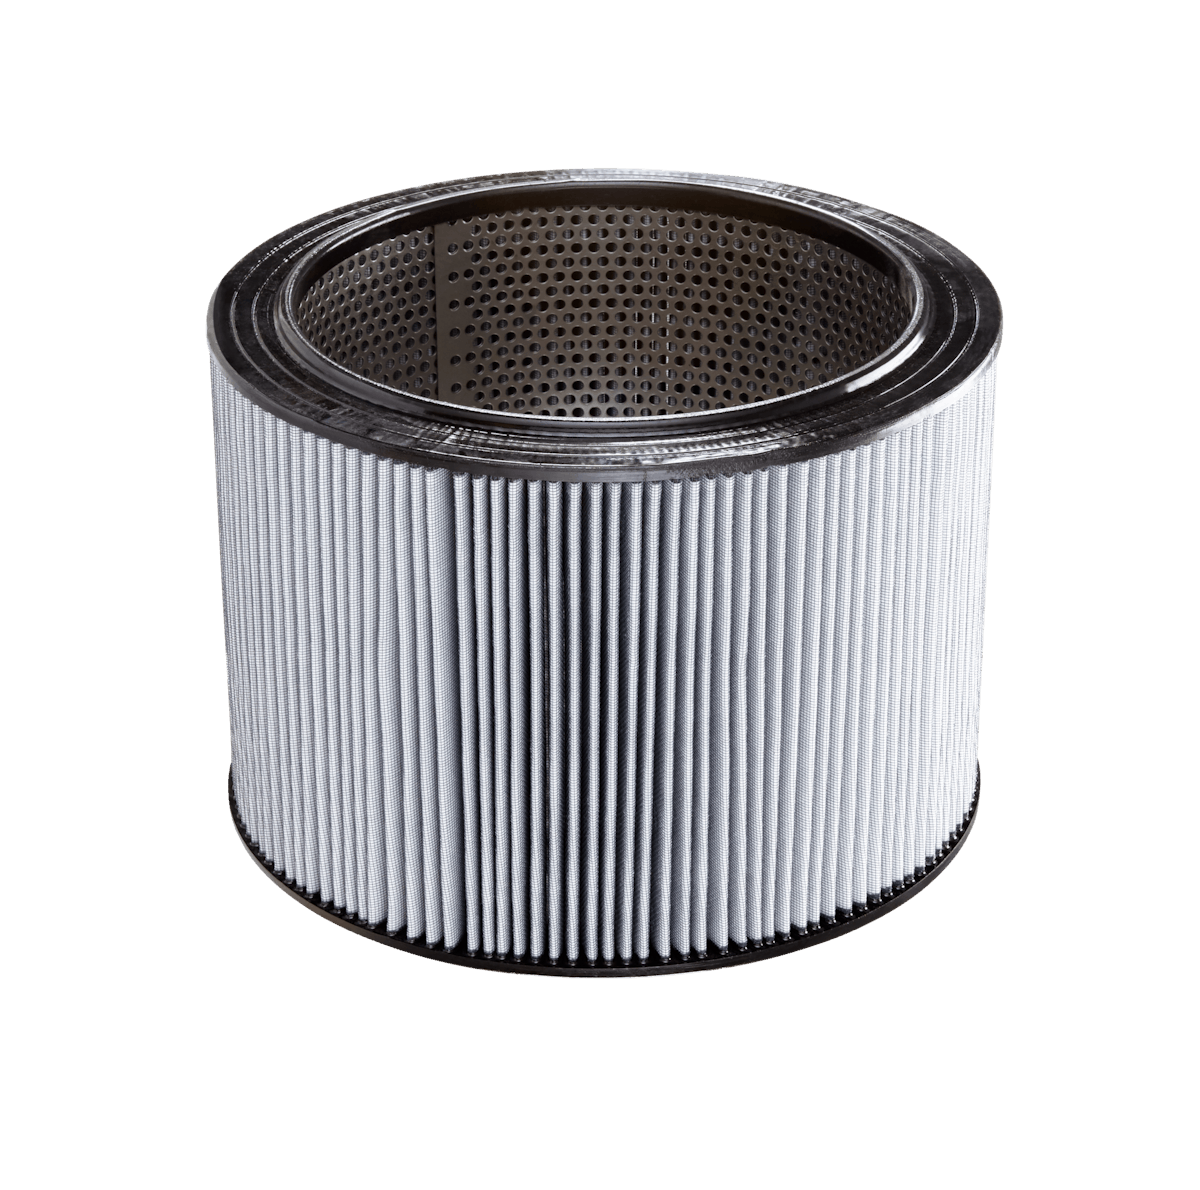 Replacement air intake filters for vacuum truck manufacturers' equipment systems